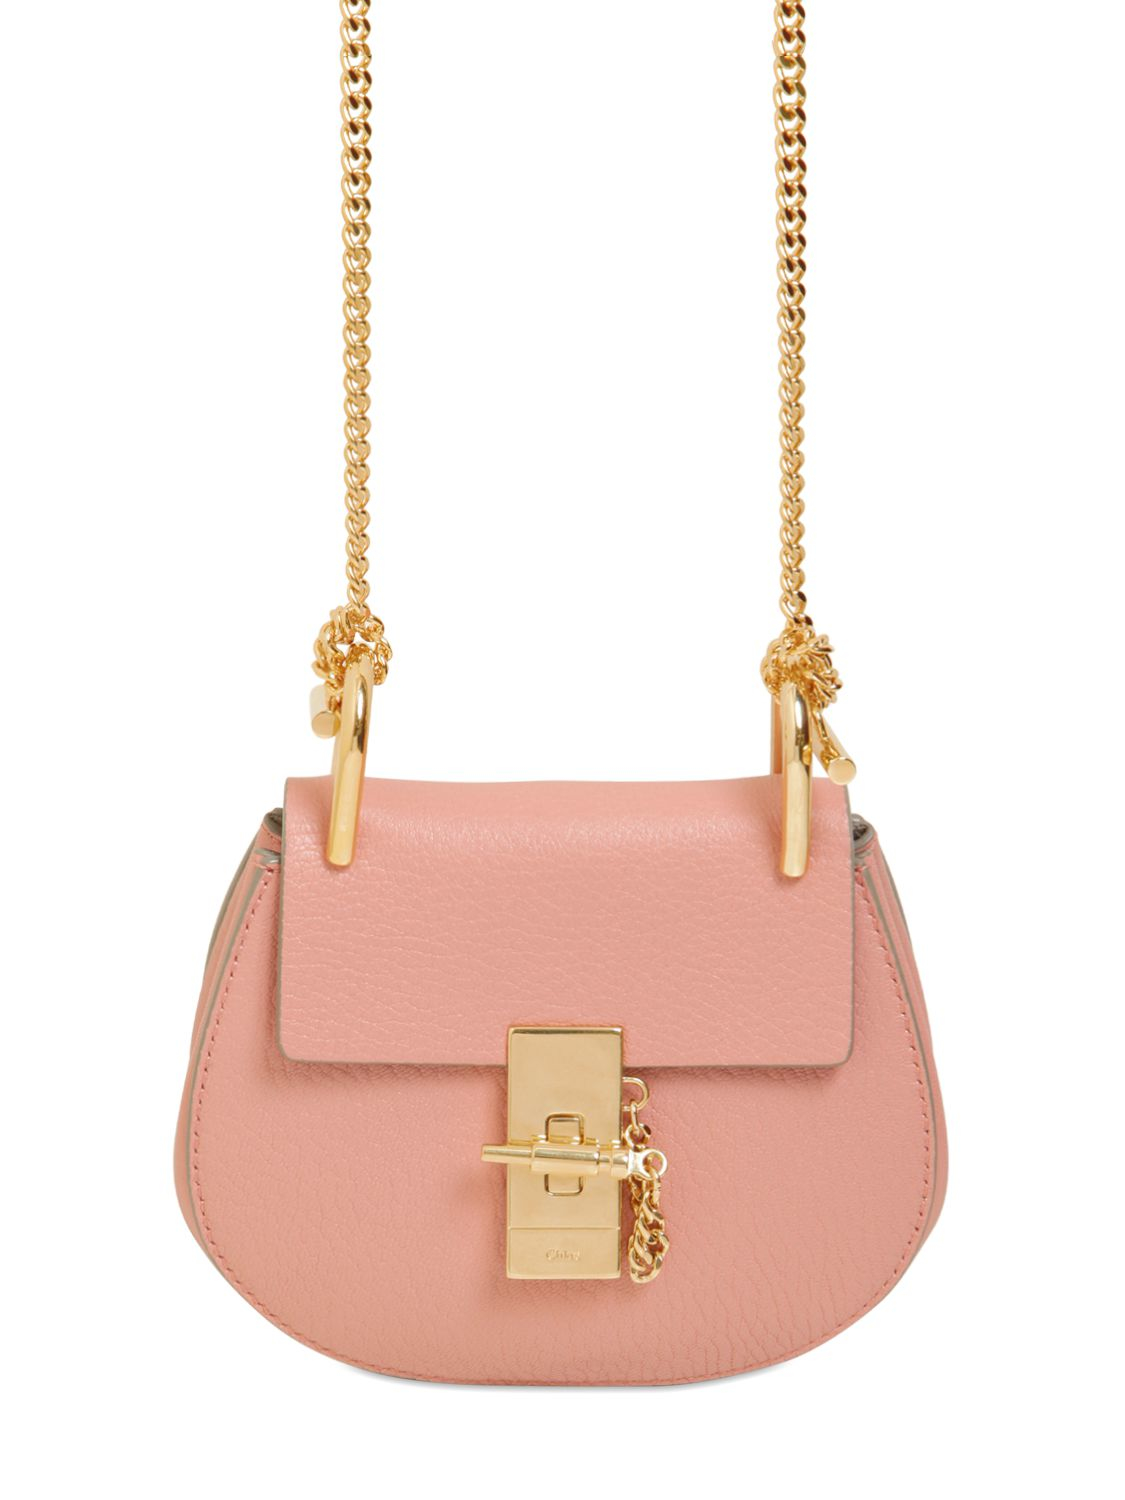 Chloé Nano Drew Grained Leather Shoulder Bag in Pink | Lyst